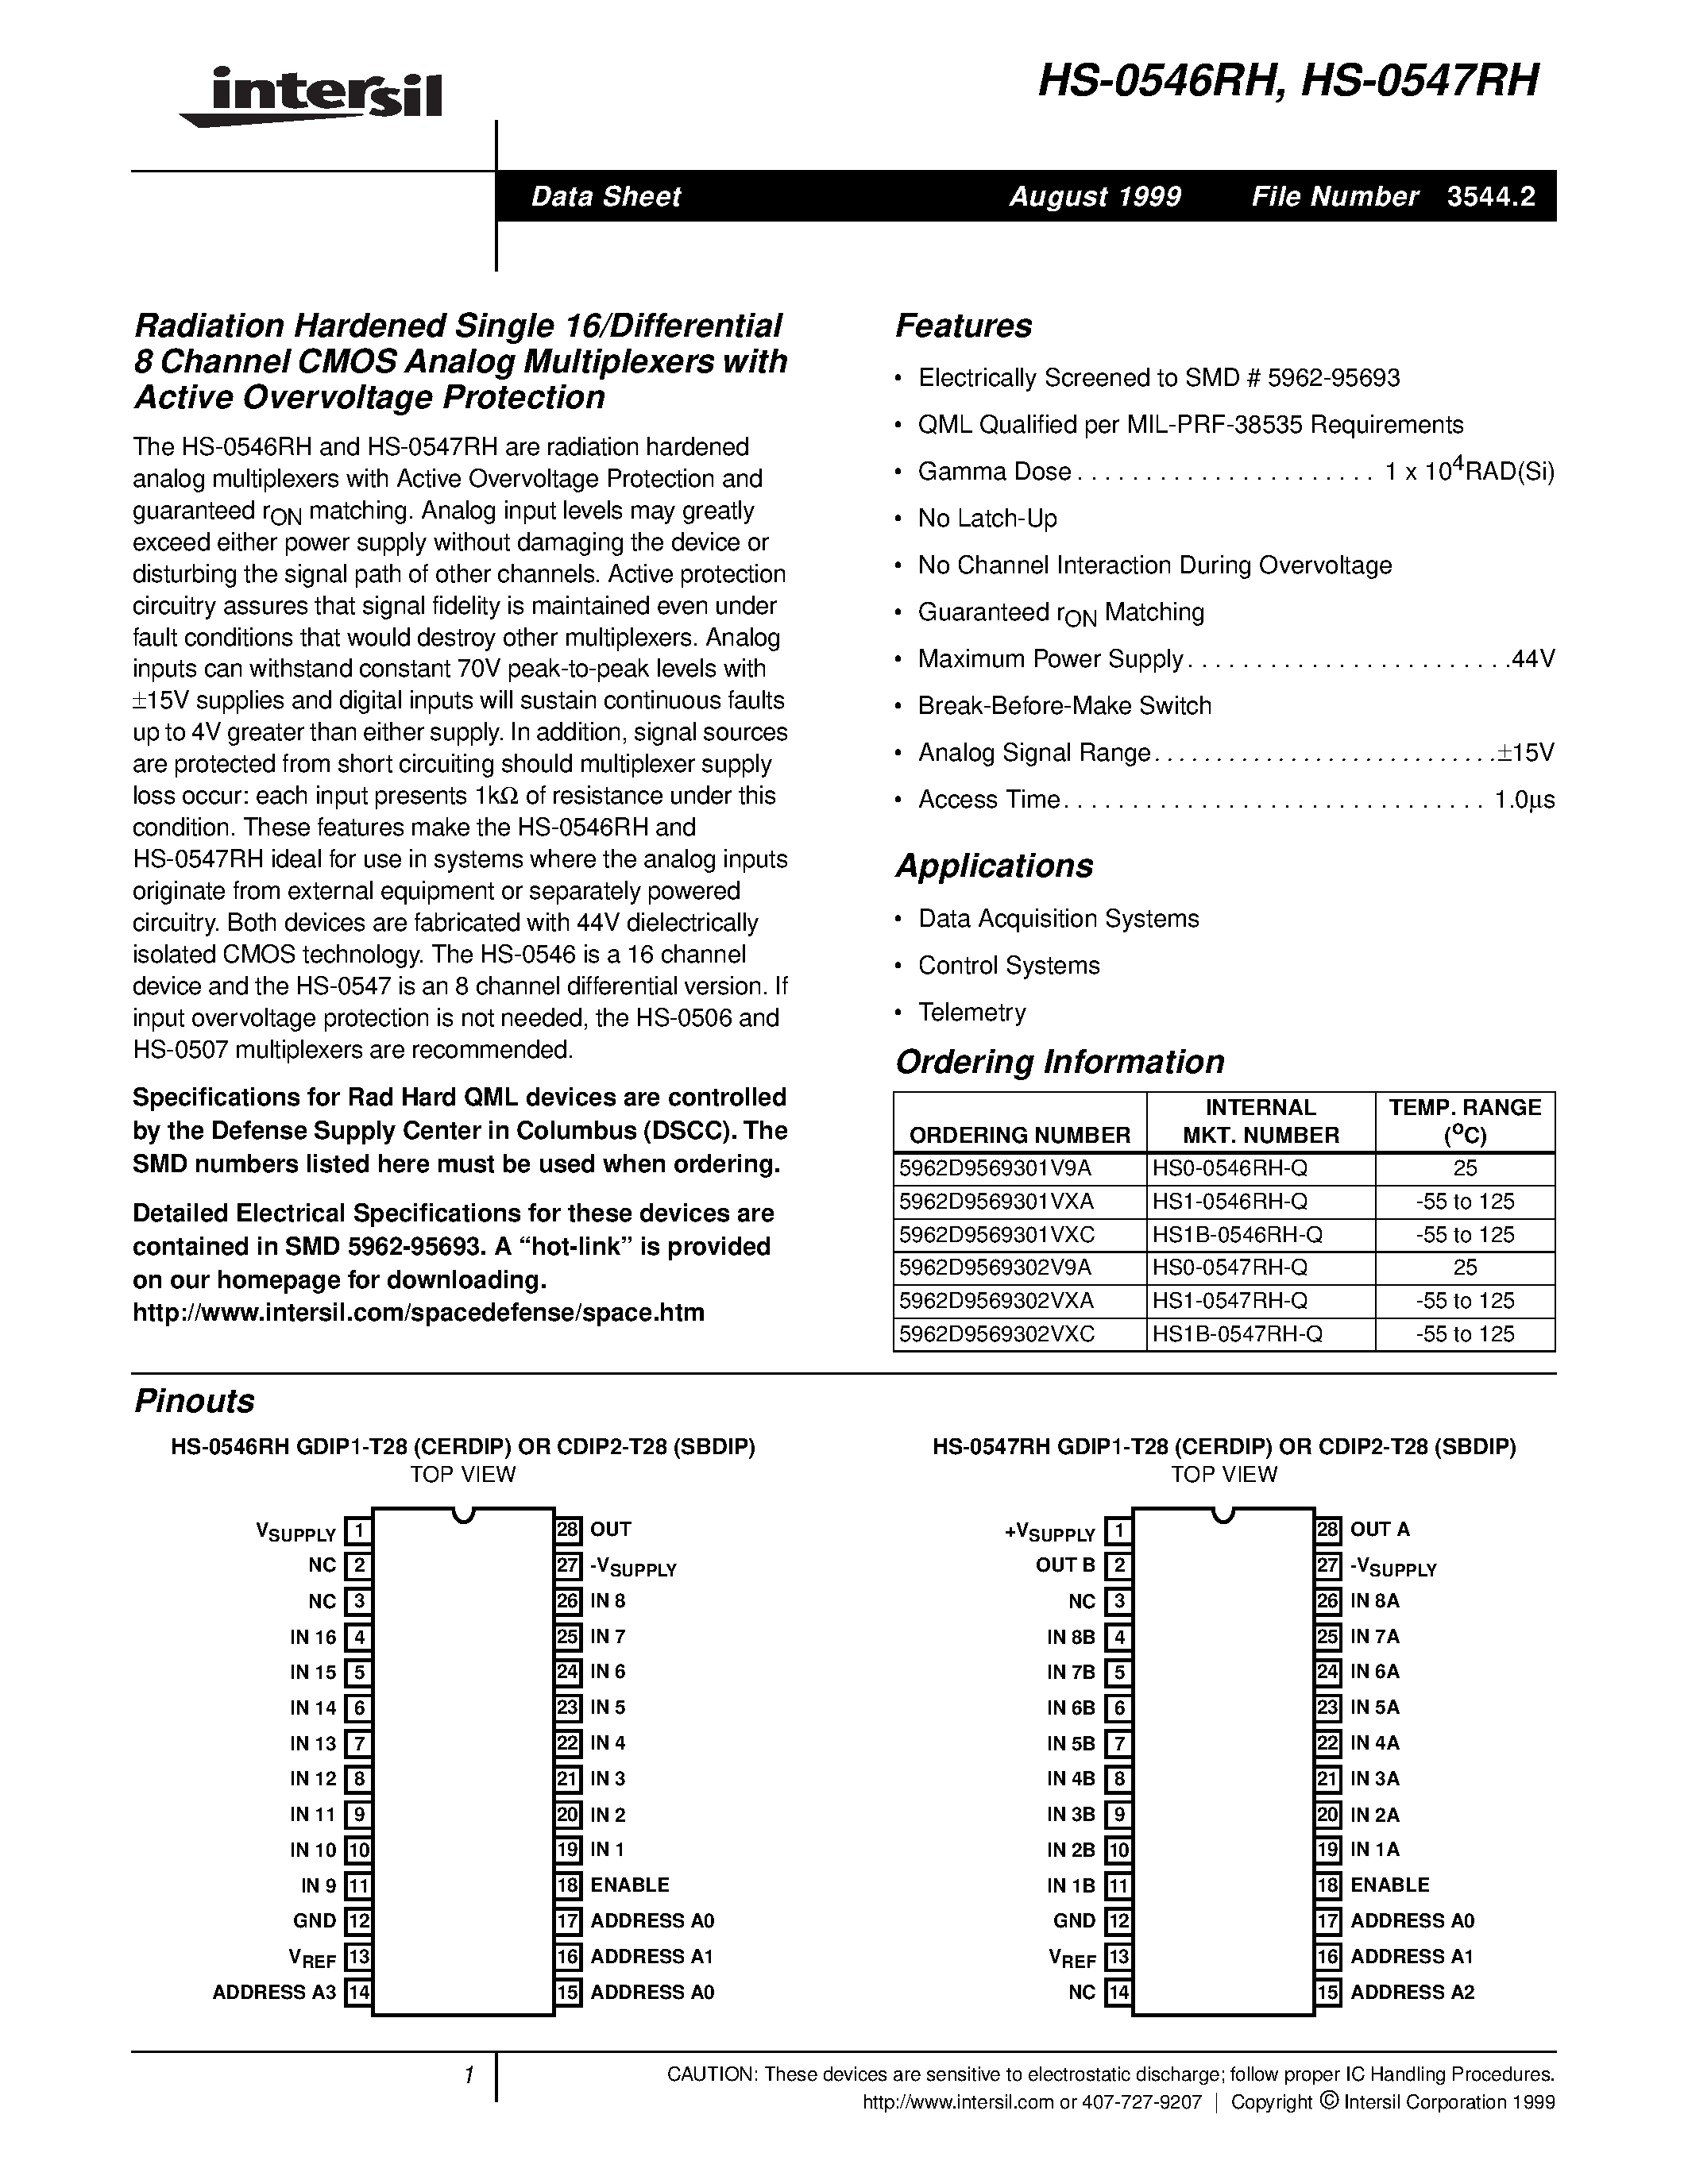 Datasheet HS0-0547RH-Q - Radiation Hardened Single 16/Differential 8 Channel CMOS Analog Multiplexers with Active Overvoltage Protection page 1